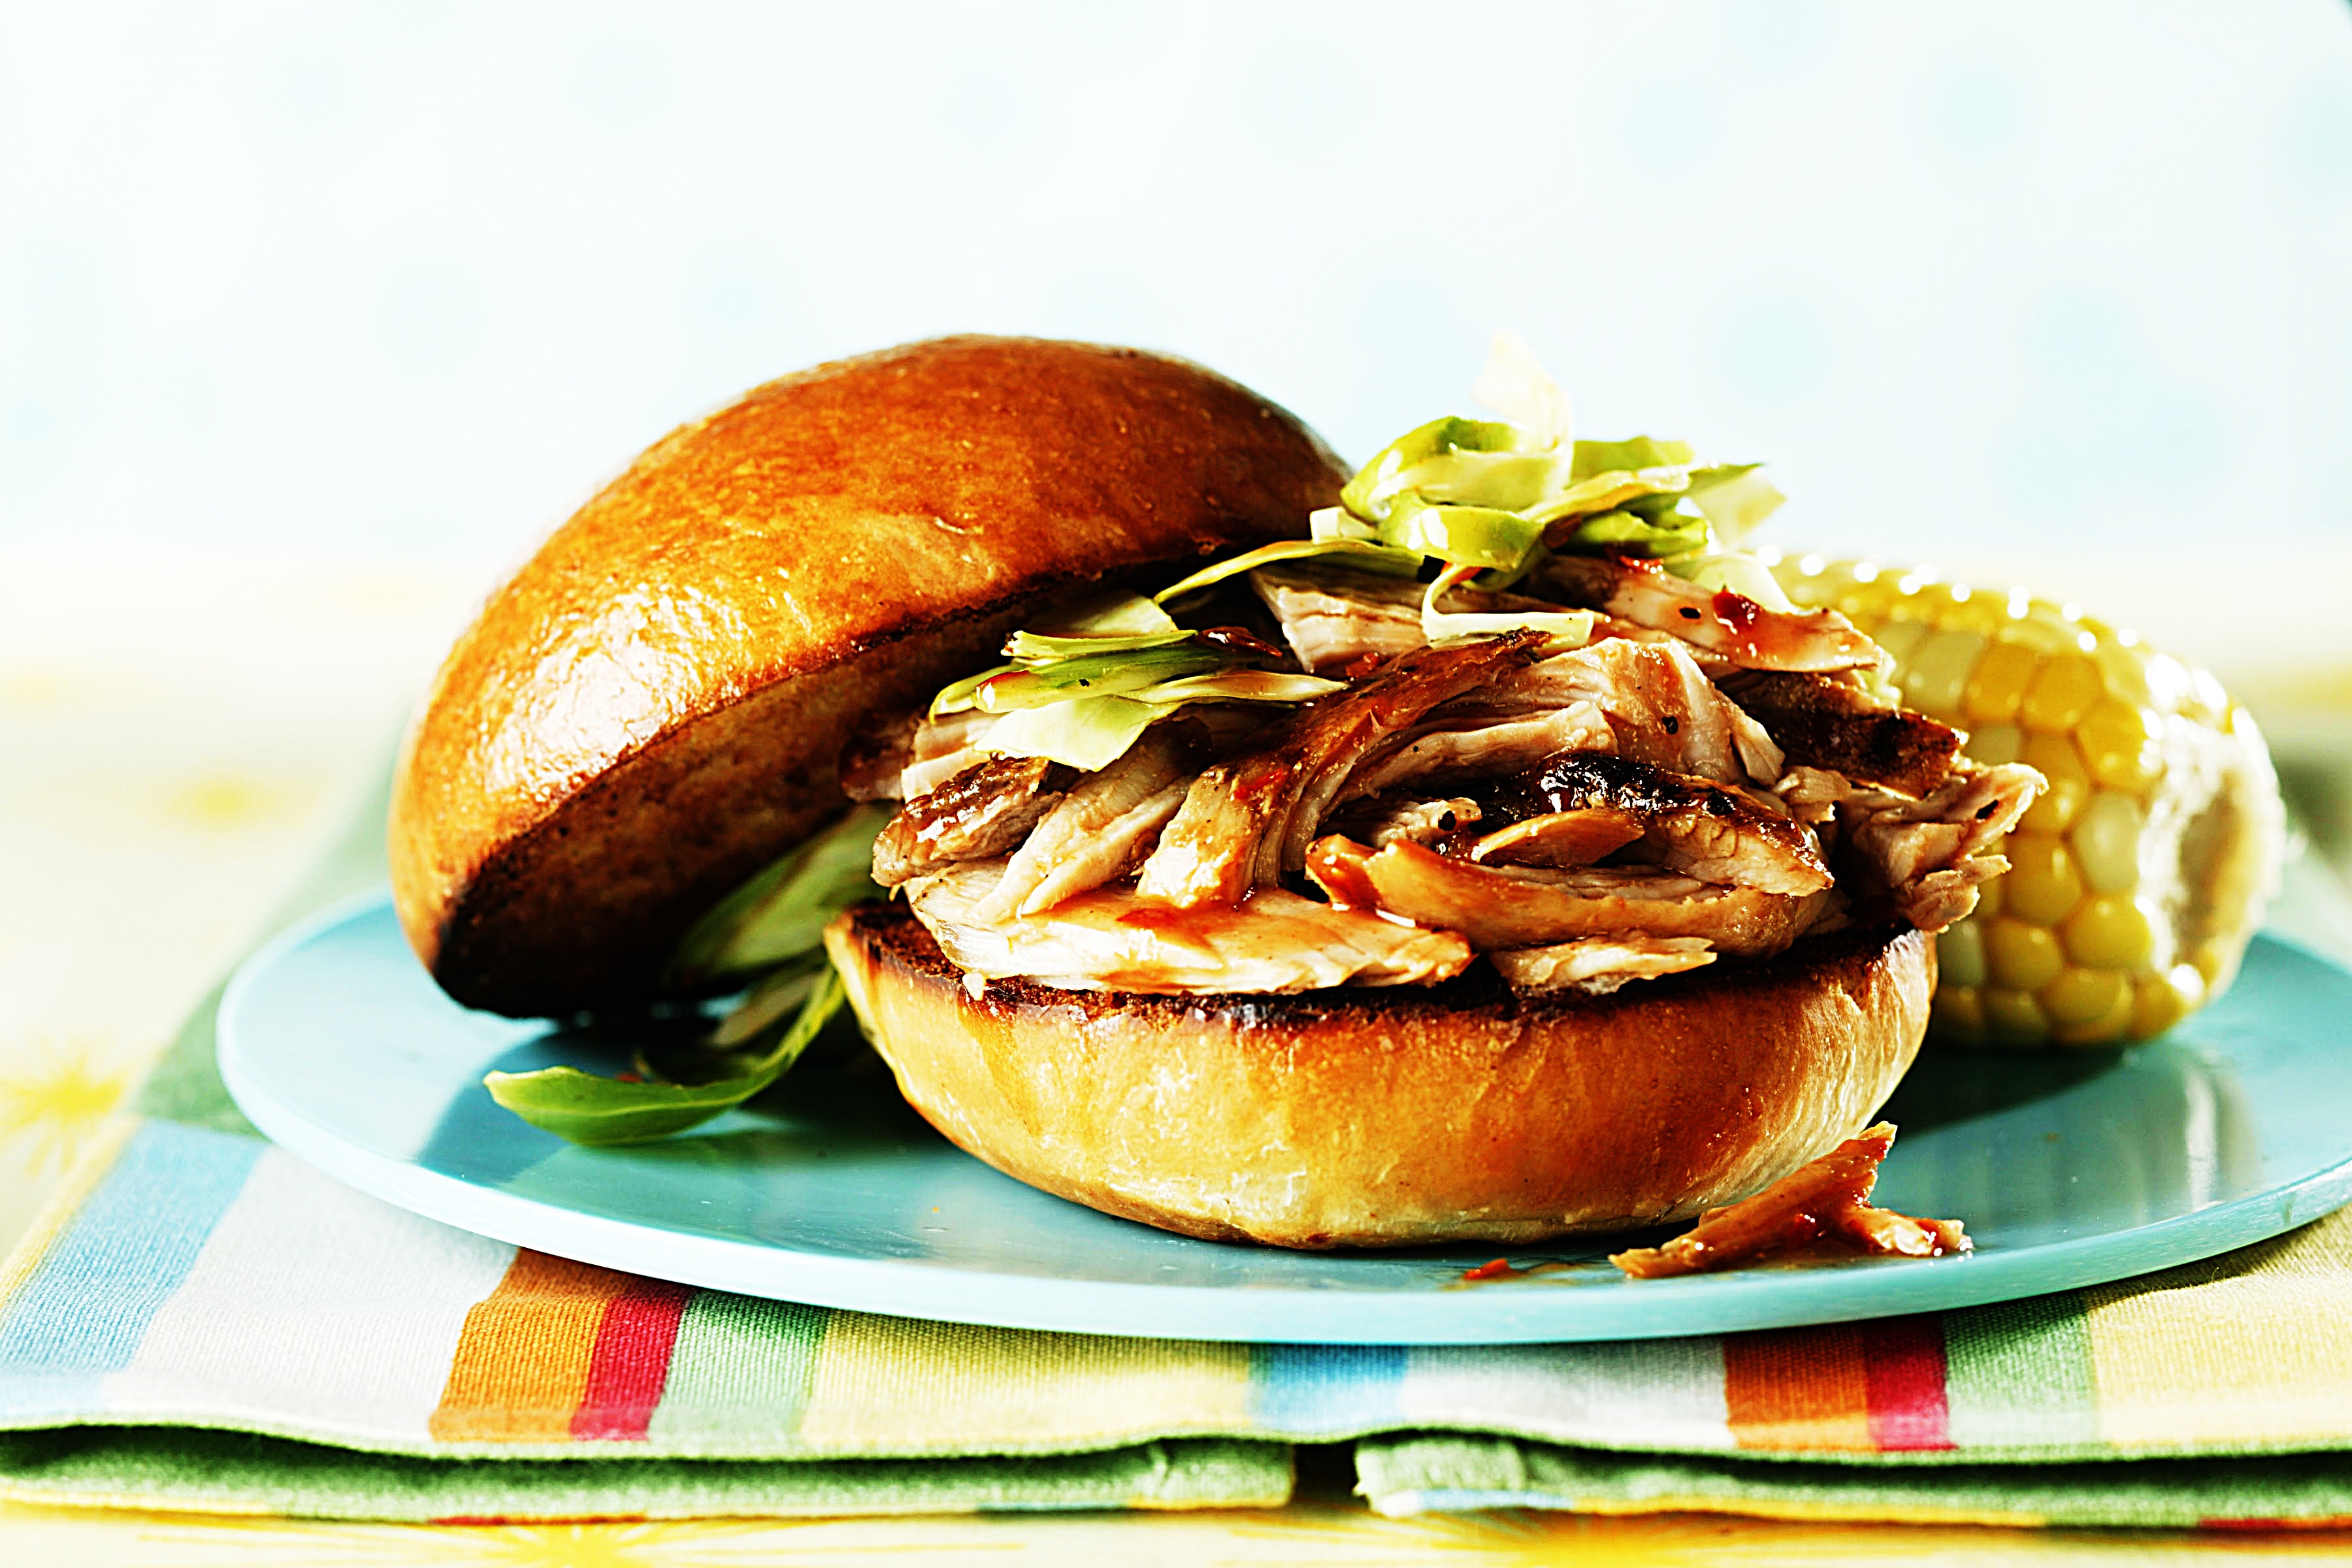 Stupid-Easy Recipe for North Carolina-Style Pulled Pork Sandwiches (#1 Top-Rated)